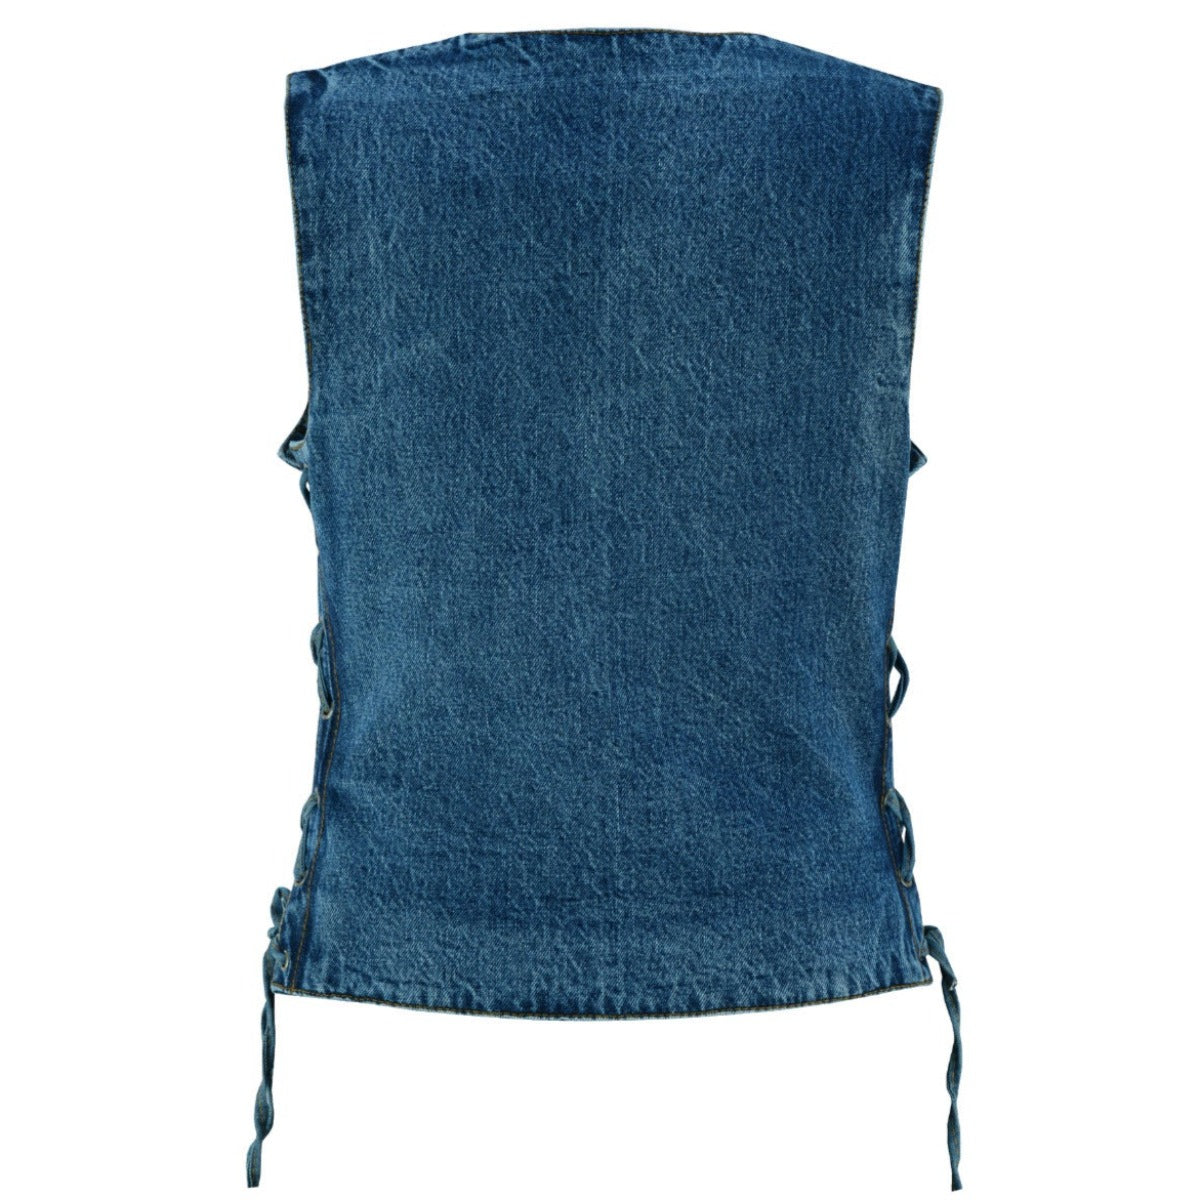 The Vance Leather Women's Blue Denim V-Neck Vest w/Snap Opening & Side Laces showcases pockets in the back for women.